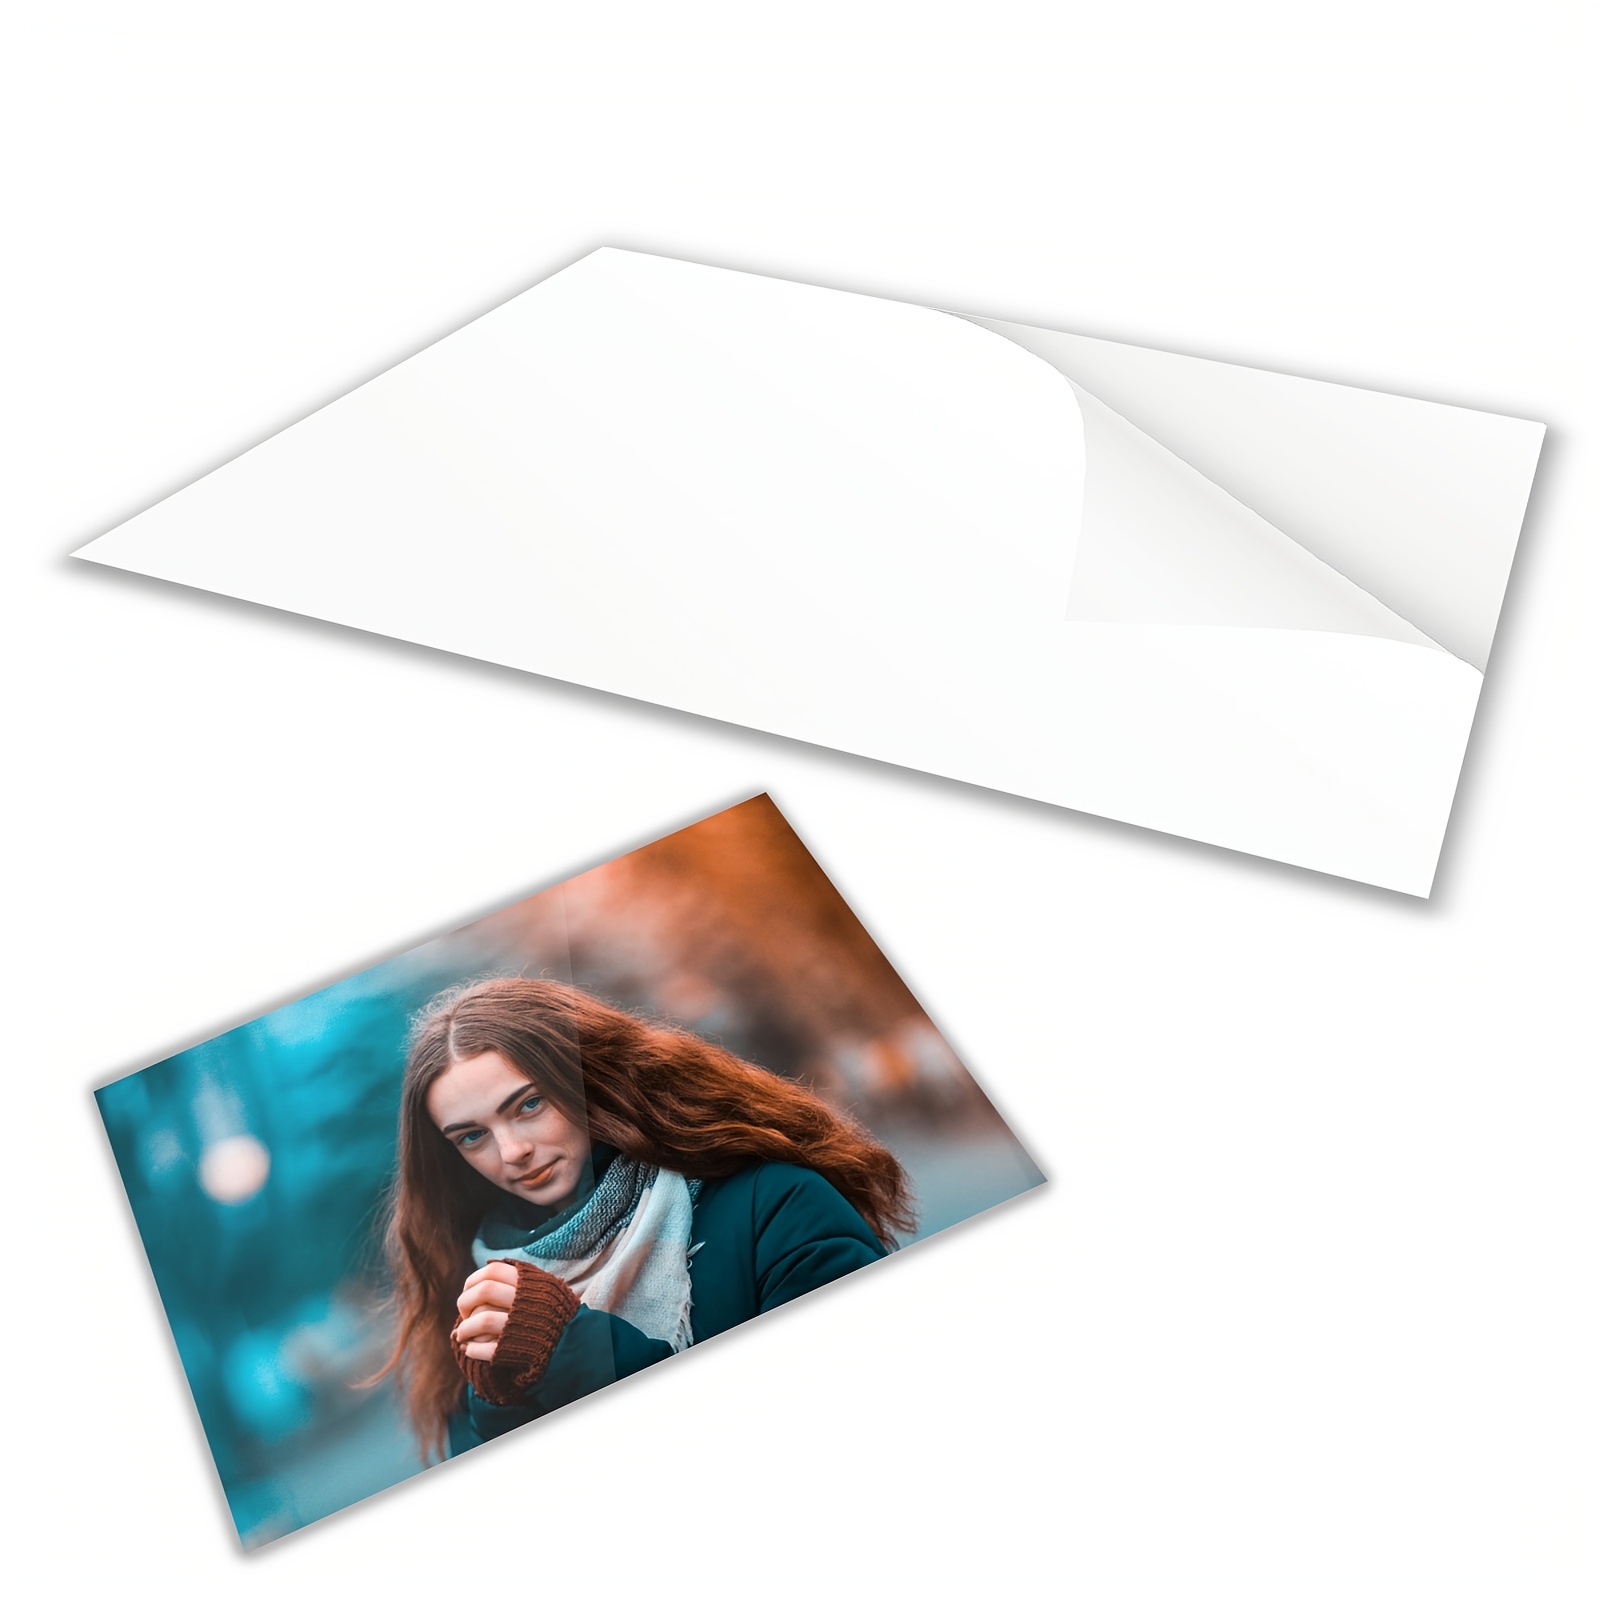 Clear Self Stick Cold Laminating Sheets 10 MIL Letter Size (Packs